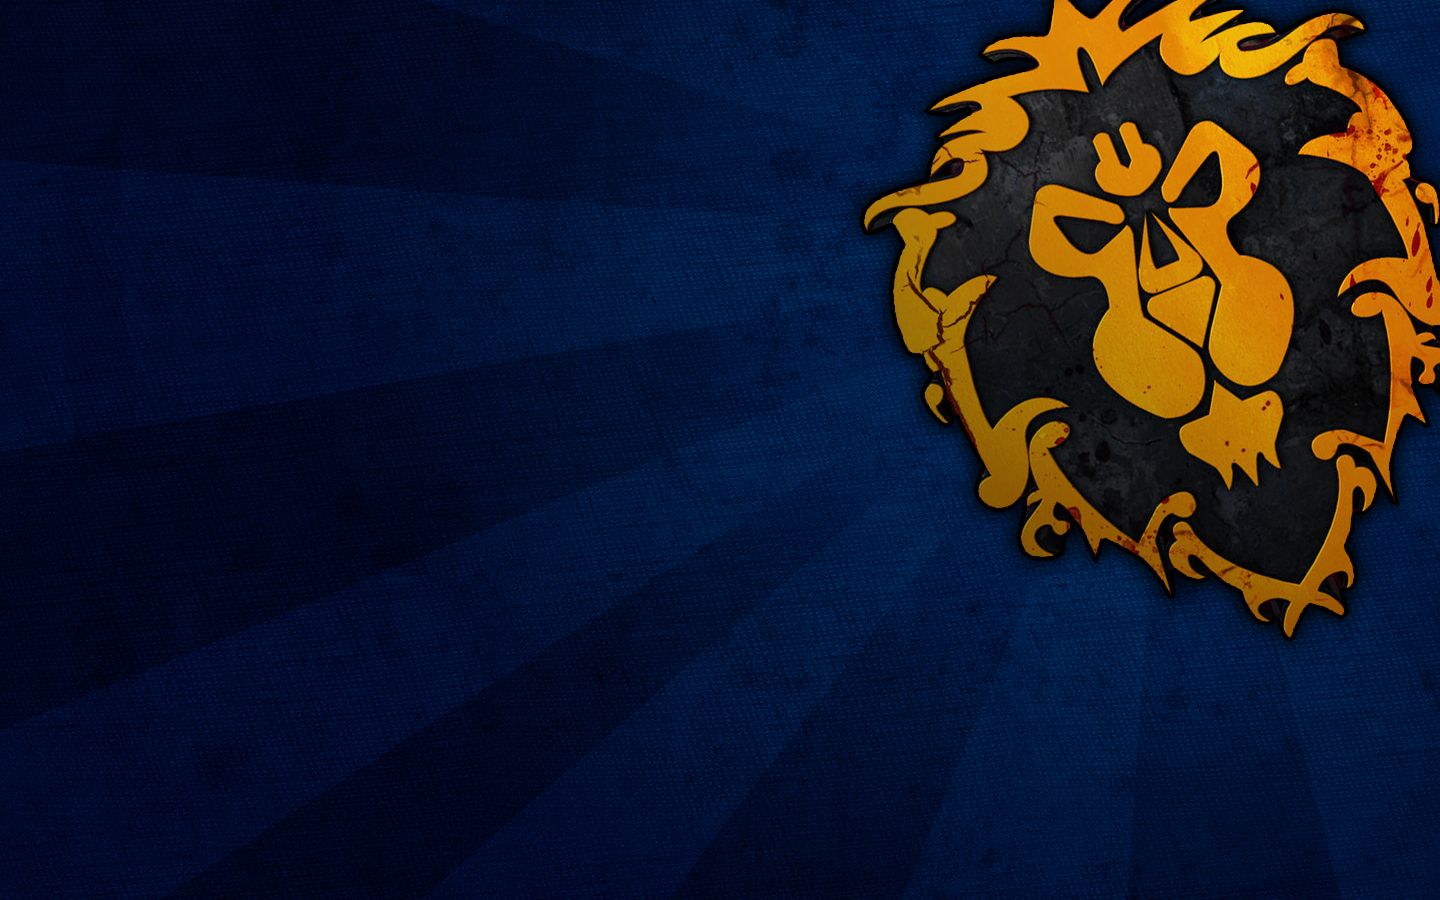 Free download Wow Alliance Logo Wallpaper For the alliance